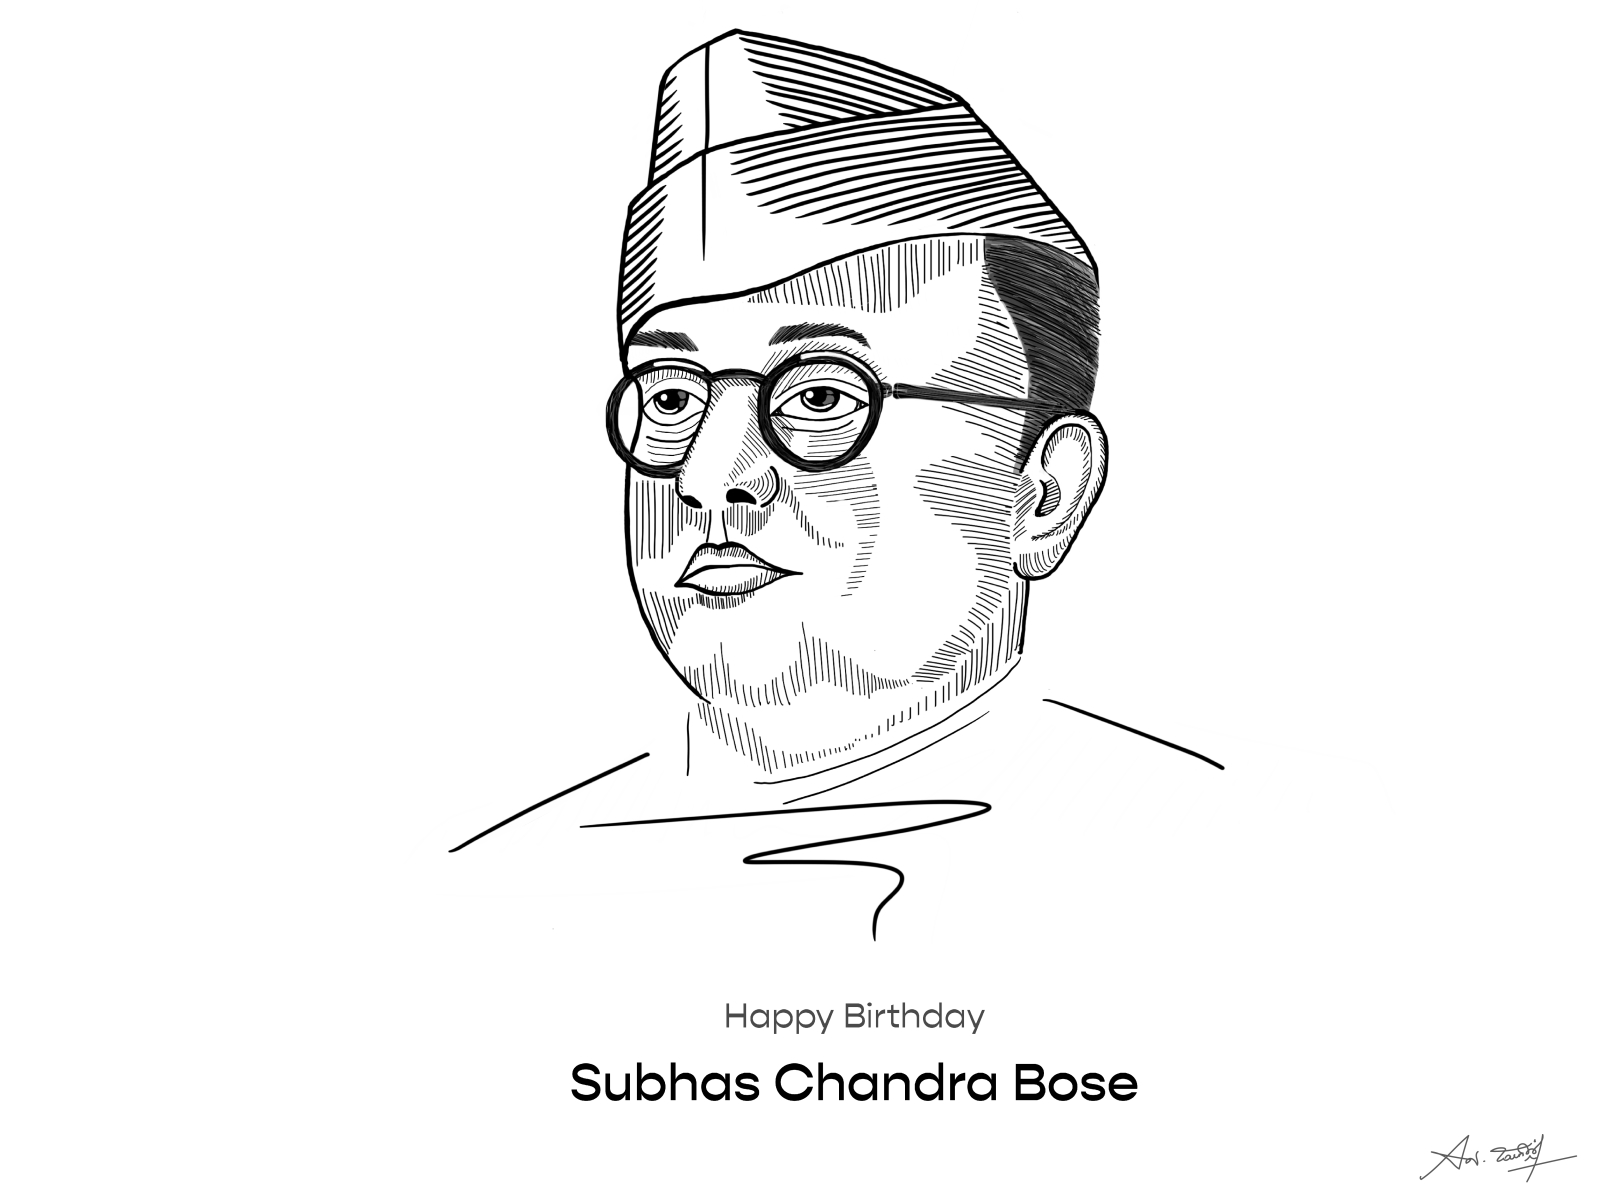 Freedom Fighter Netaji Subhash Chandra Bose Sketch India Asia Stock Photo  Picture And Rights Managed Image Pic DPAAKM191448  agefotostock